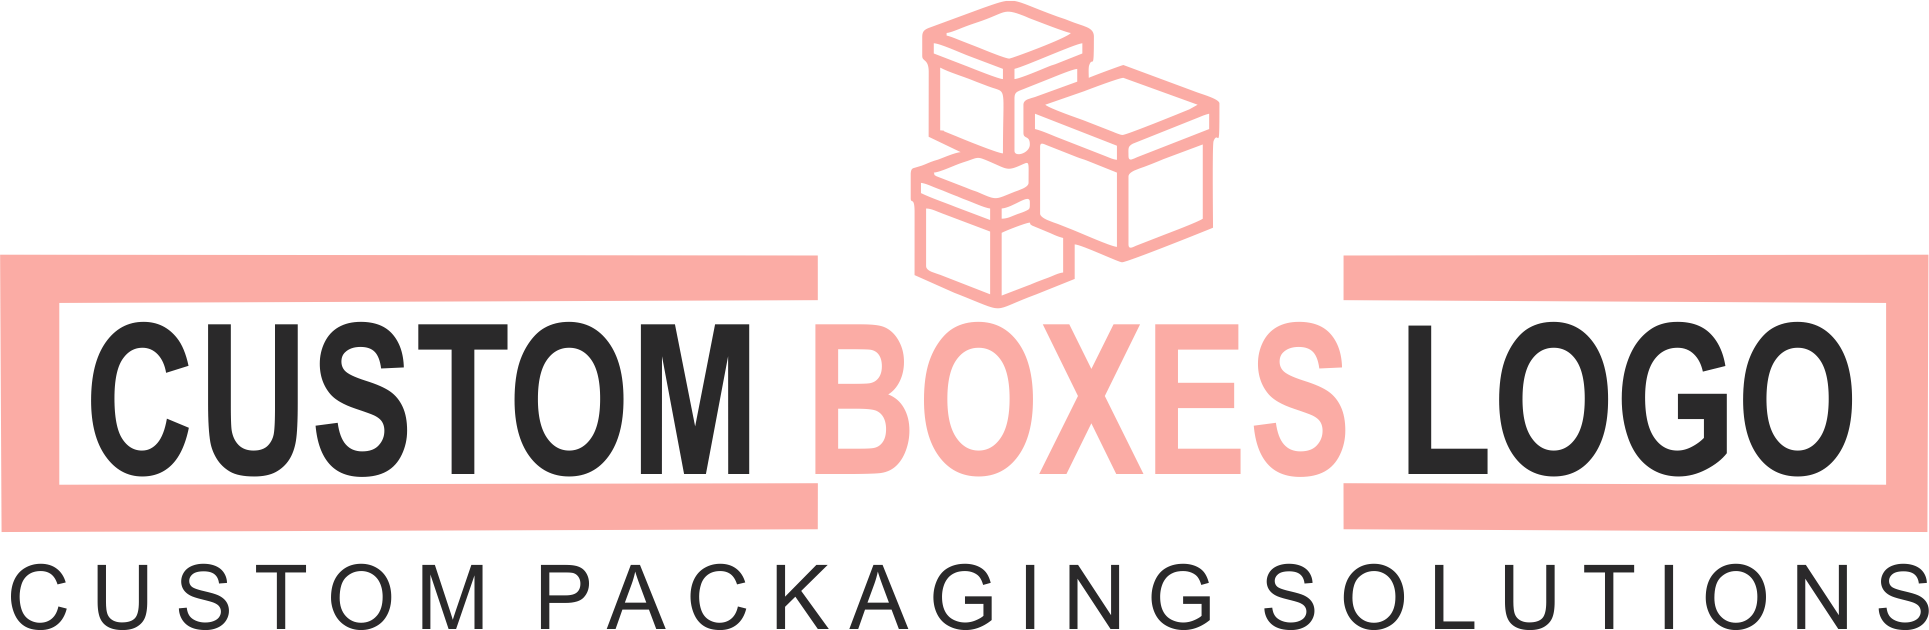 cropped-Custom-Boxes-Logo-1.png